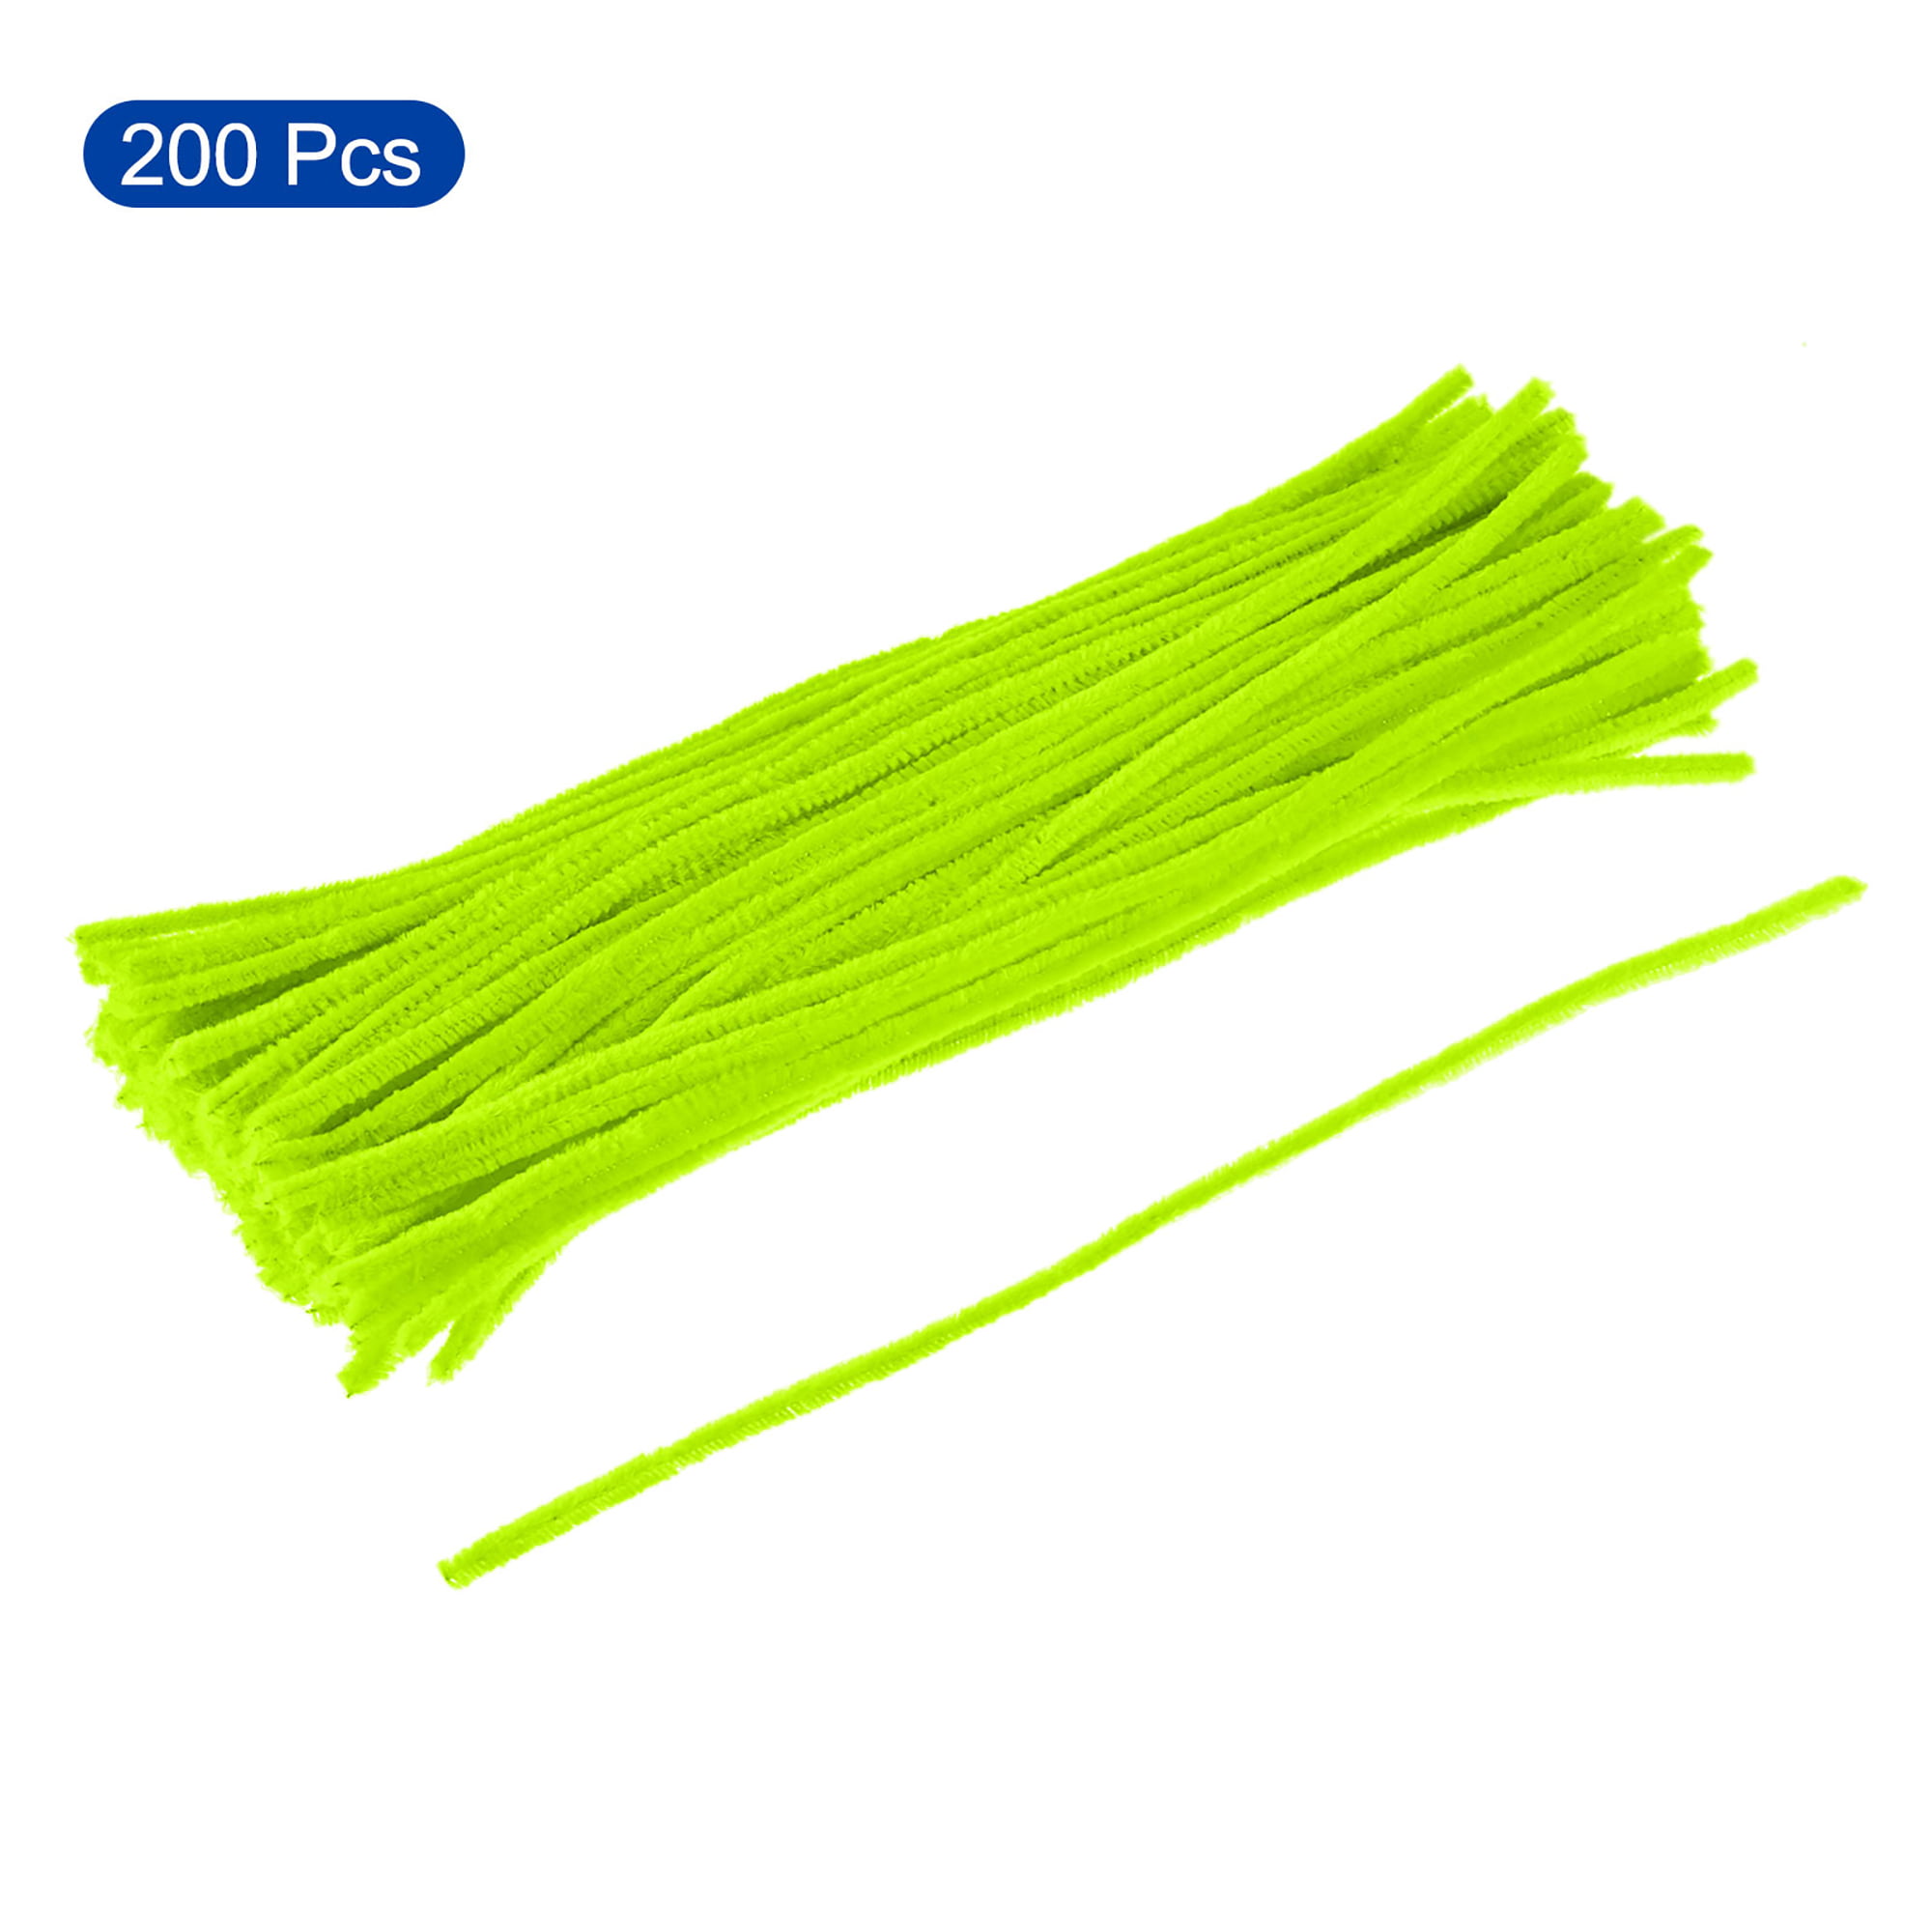 Pipe Cleaners, 6mm x 30cm, 40 pk, Lime Green, Chenille Stems